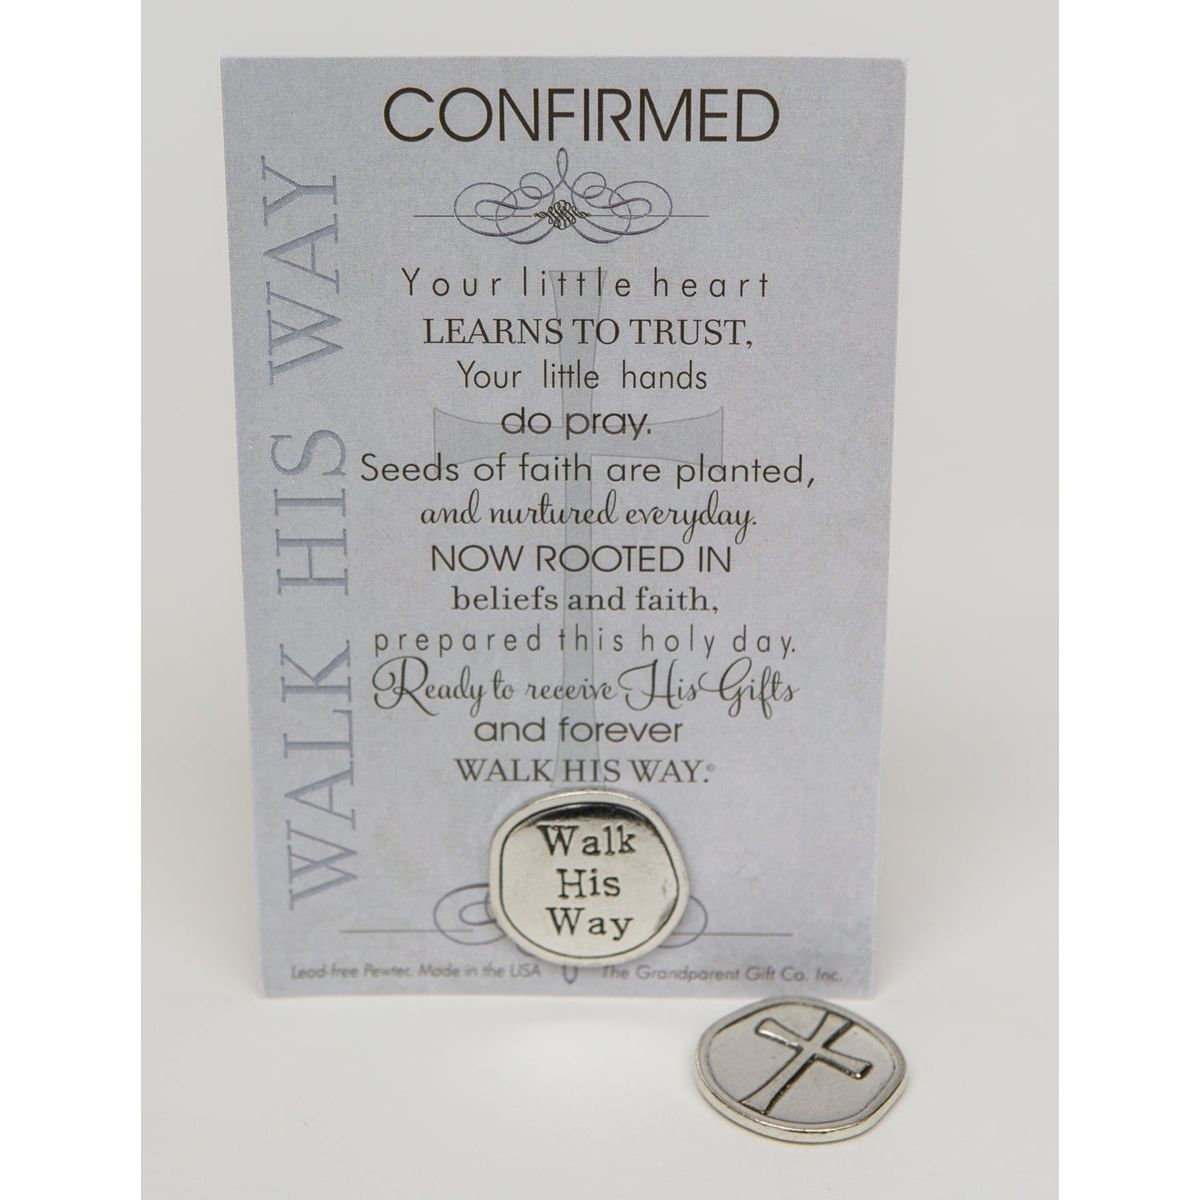 Confirmation Gift: Handmade pewter coin with "Walk His Way" on one side and an cross on the other, packaged in a clear bag with "Confirmed" poem.